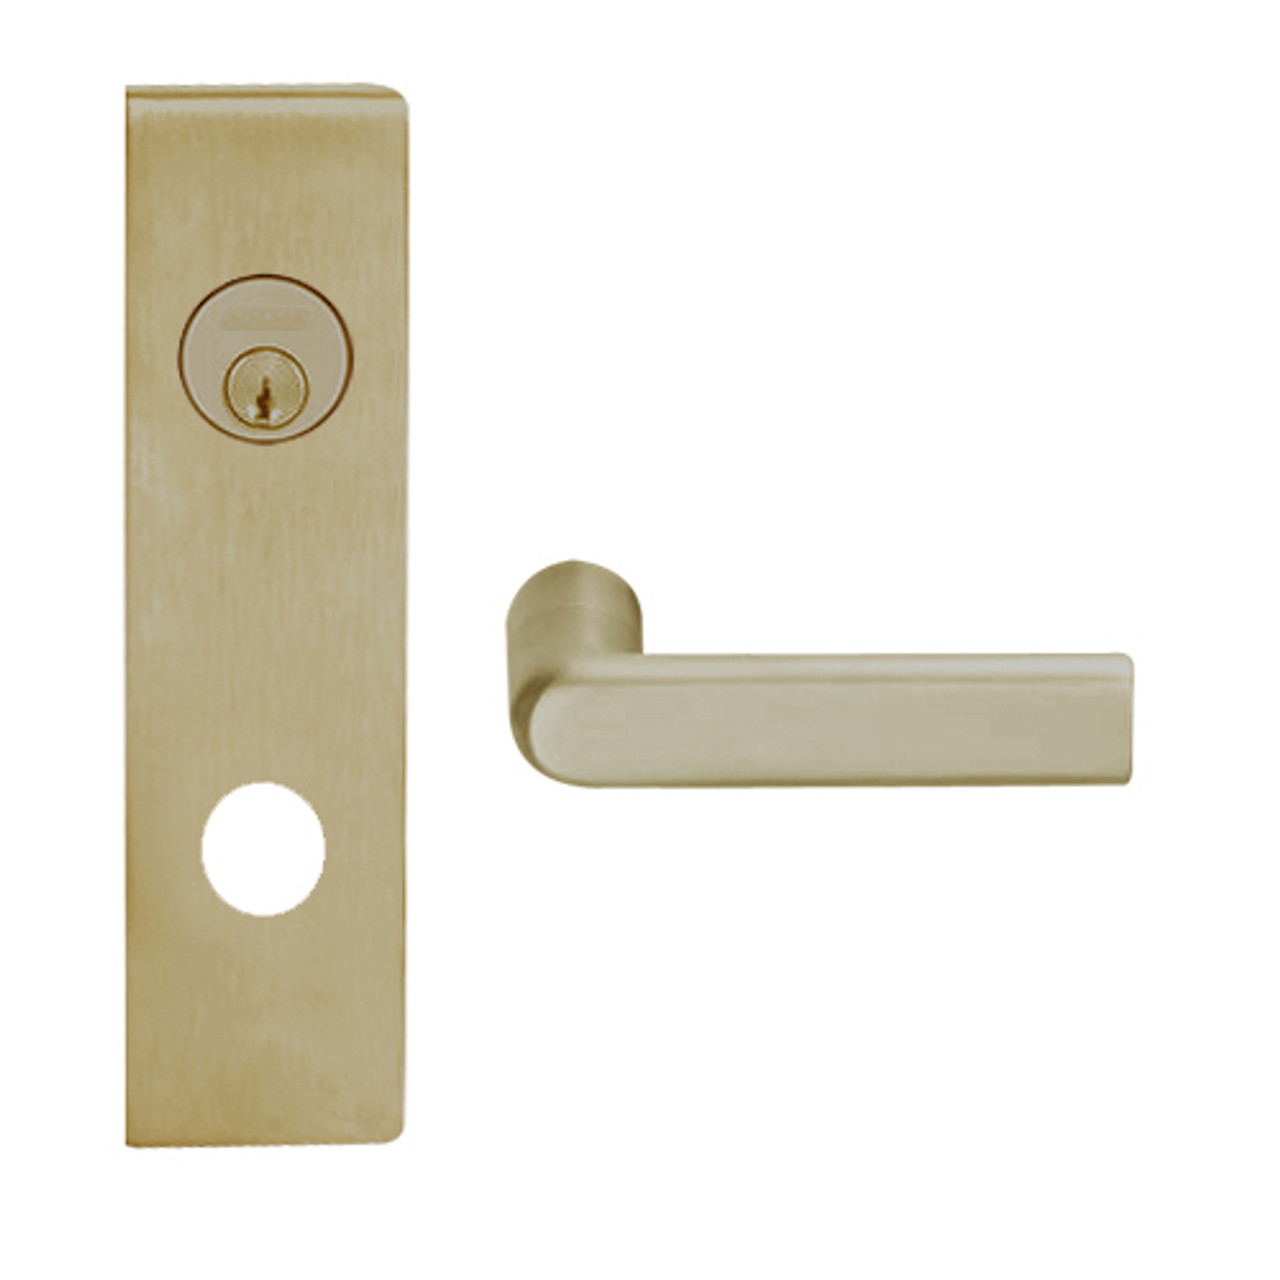 L9080L-01N-613 Schlage L Series Less Cylinder Storeroom Commercial Mortise Lock with 01 Cast Lever Design in Oil Rubbed Bronze